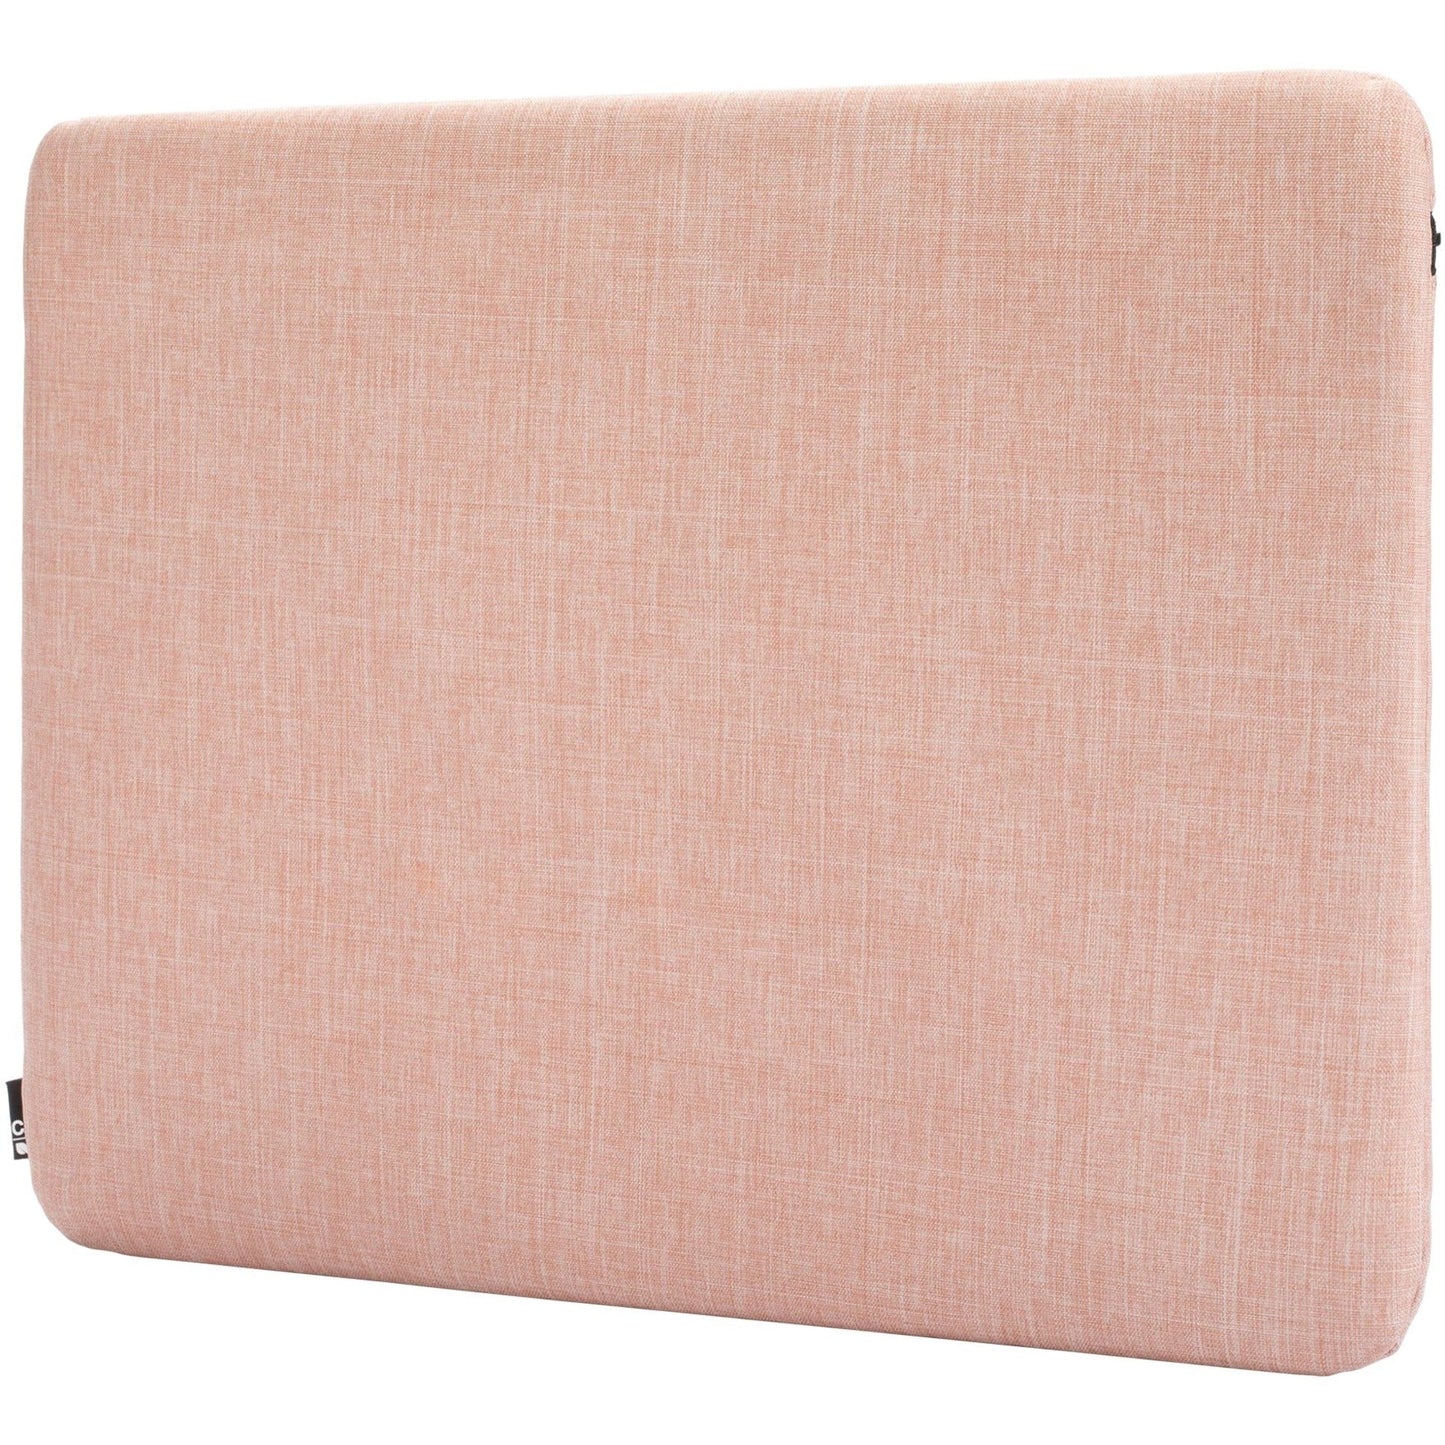 Incase Carrying Case (Sleeve) for 15" Notebook - Blush Pink